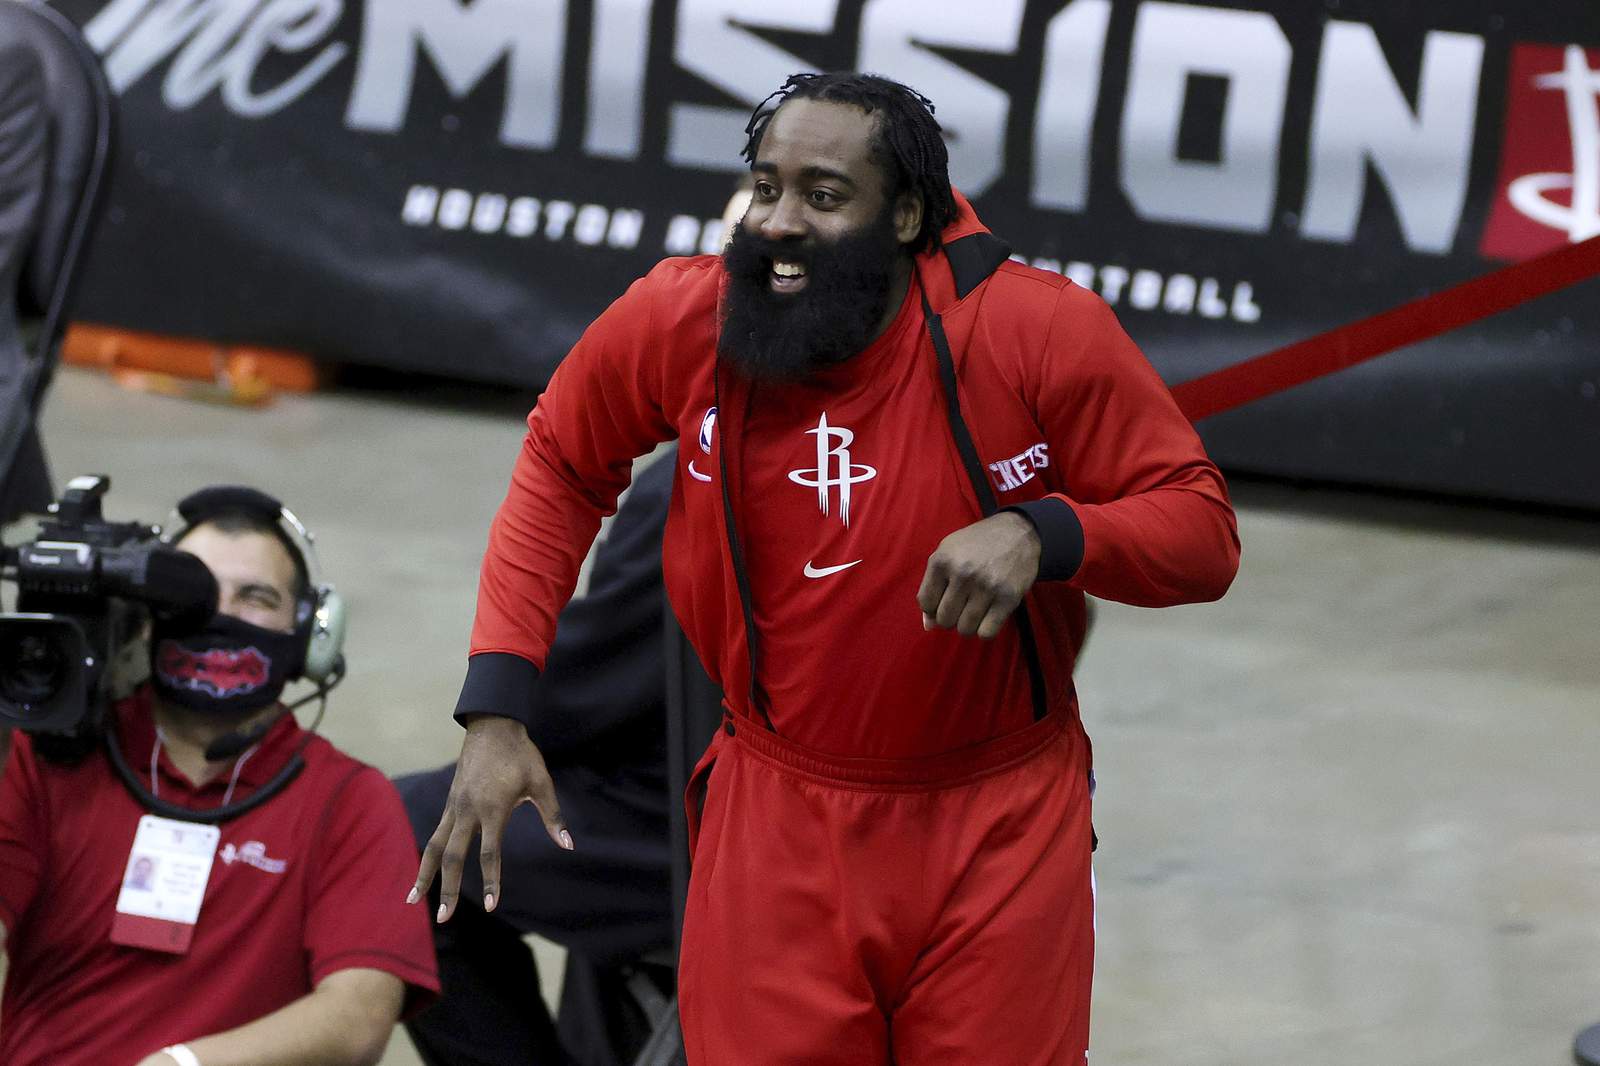 OKC-Houston game postponed, Harden out after COVID violation